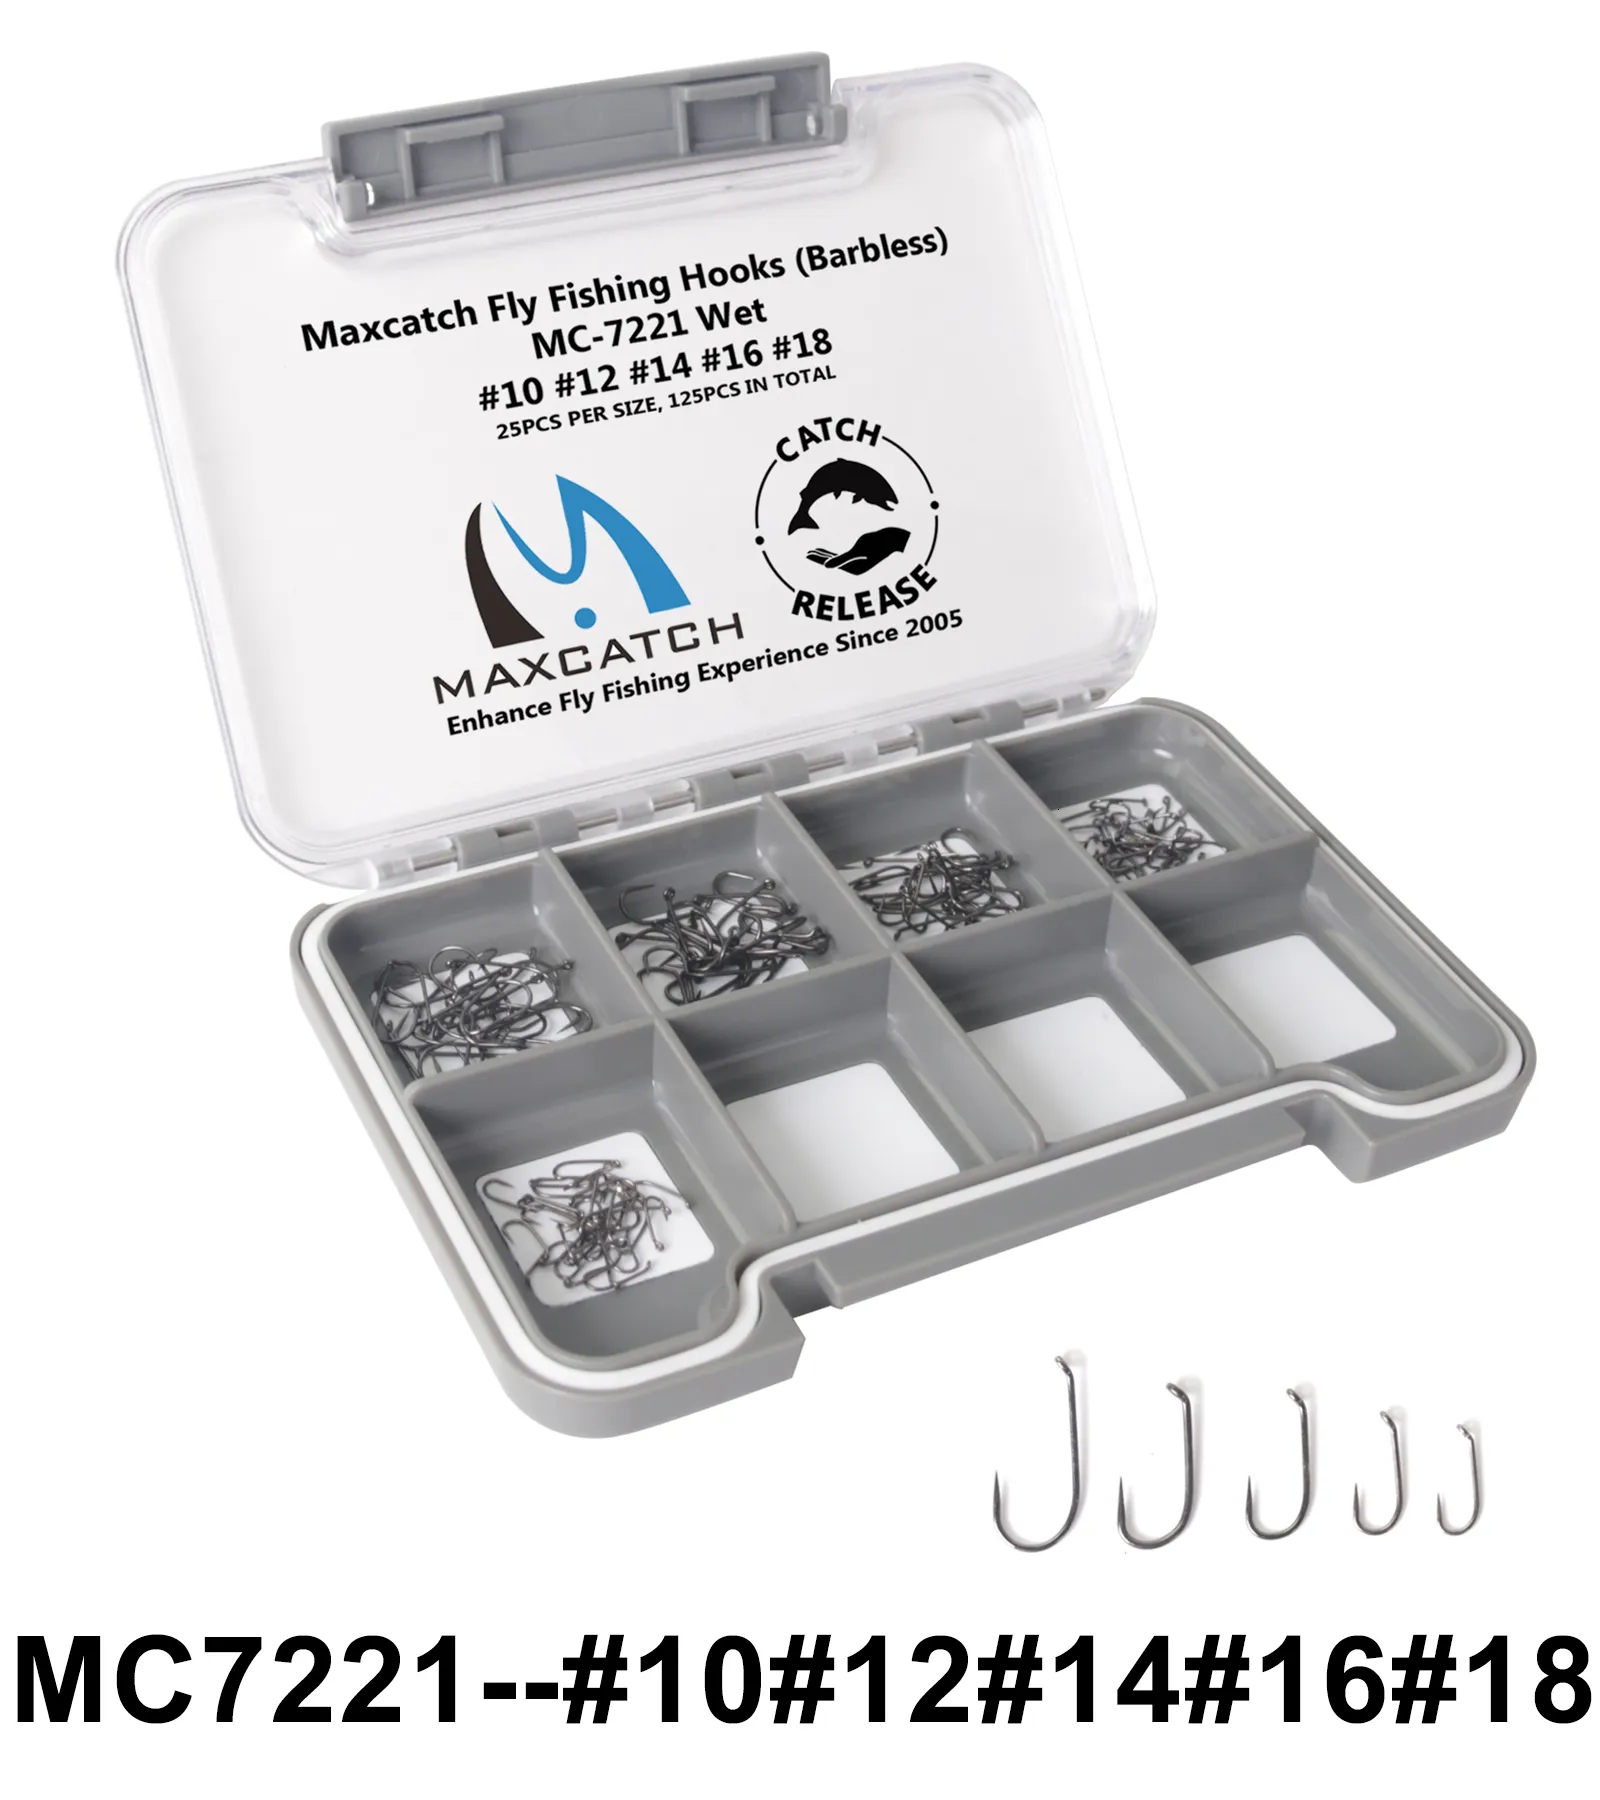 Maxcatch 100pcs 10# - 18# Fish-Friendly Barbless Fly Tying Hooks  Dry&Wet&Nymph